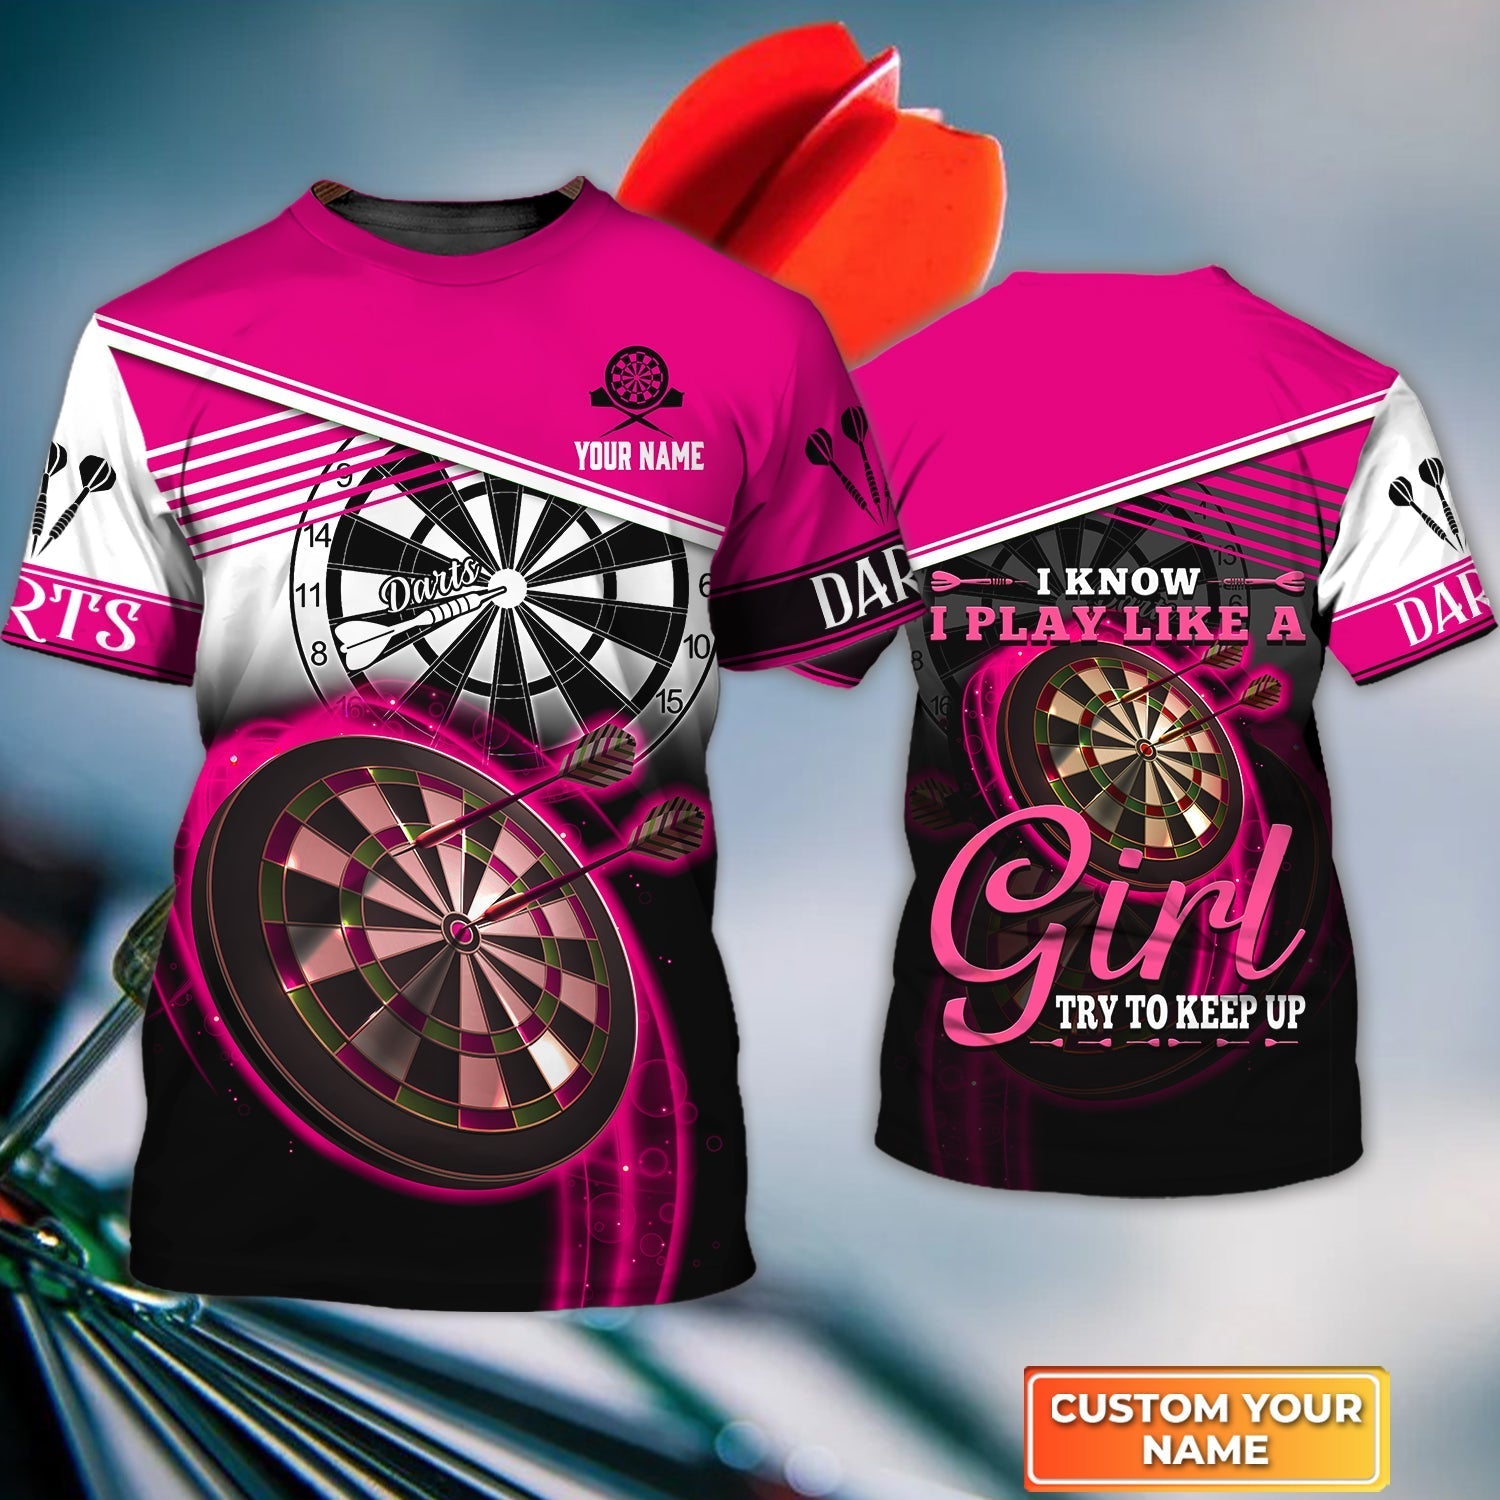 Personalized Darts T-Shirt, Darts Pink Color Shirt I Know I Play Like A Girl Try To Keep Up, Outfits For Darts Players, Darts Team